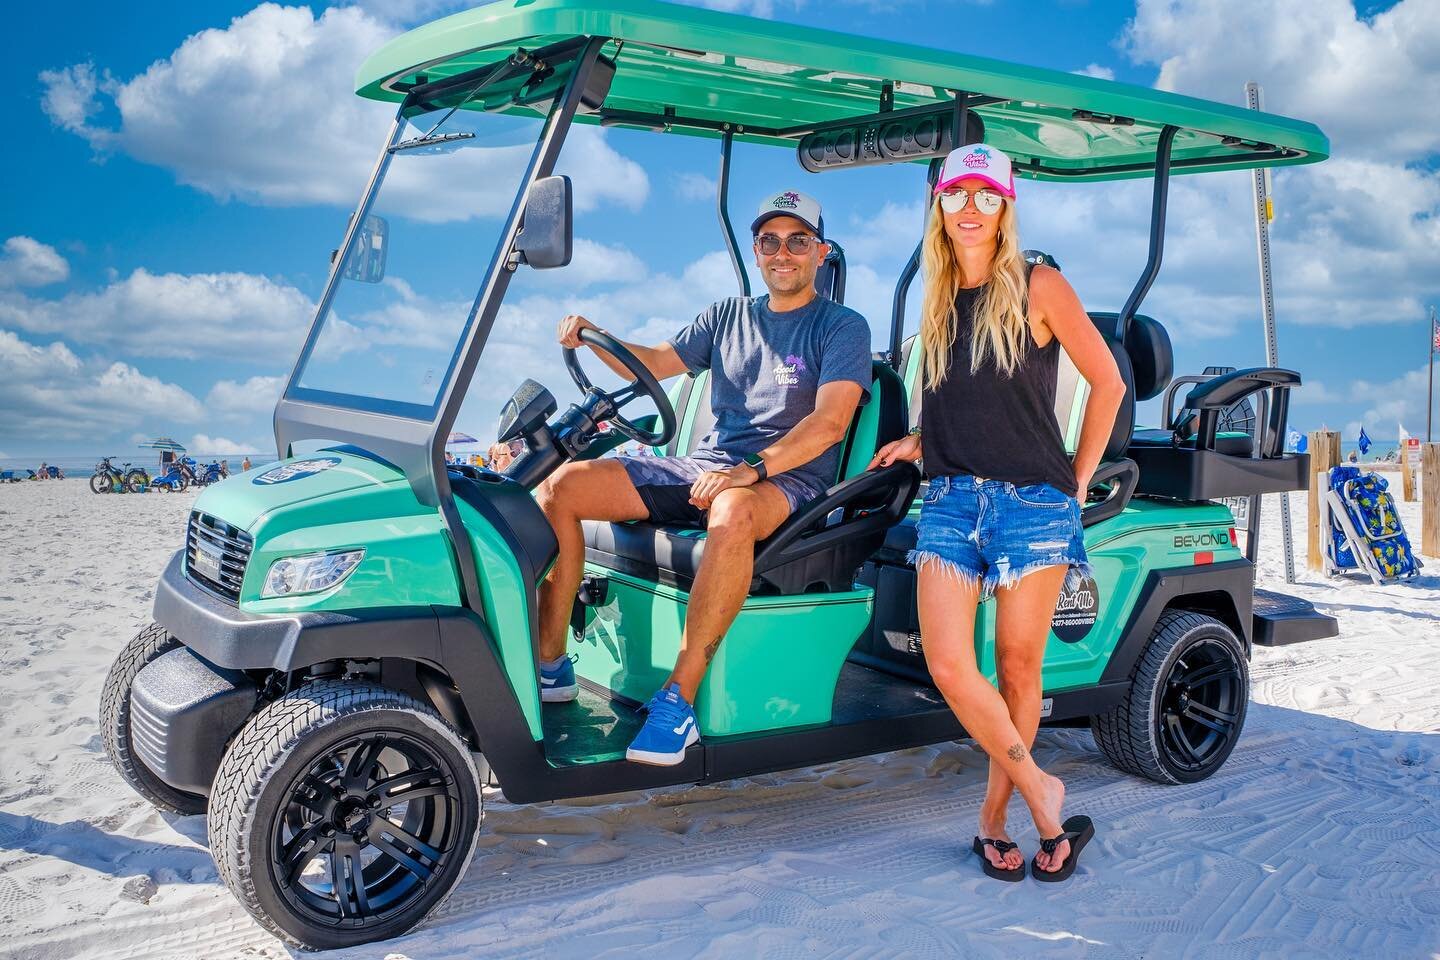 Meet Kelly and Joe 👋🏻 We are the owners of Good Vibes Island Rides in beautiful #siestakey #florida 🌊🌴 After recognizing a need for more fun and eco-friendly golf cart options on the island, we launched our small business. We pride ourselves on t